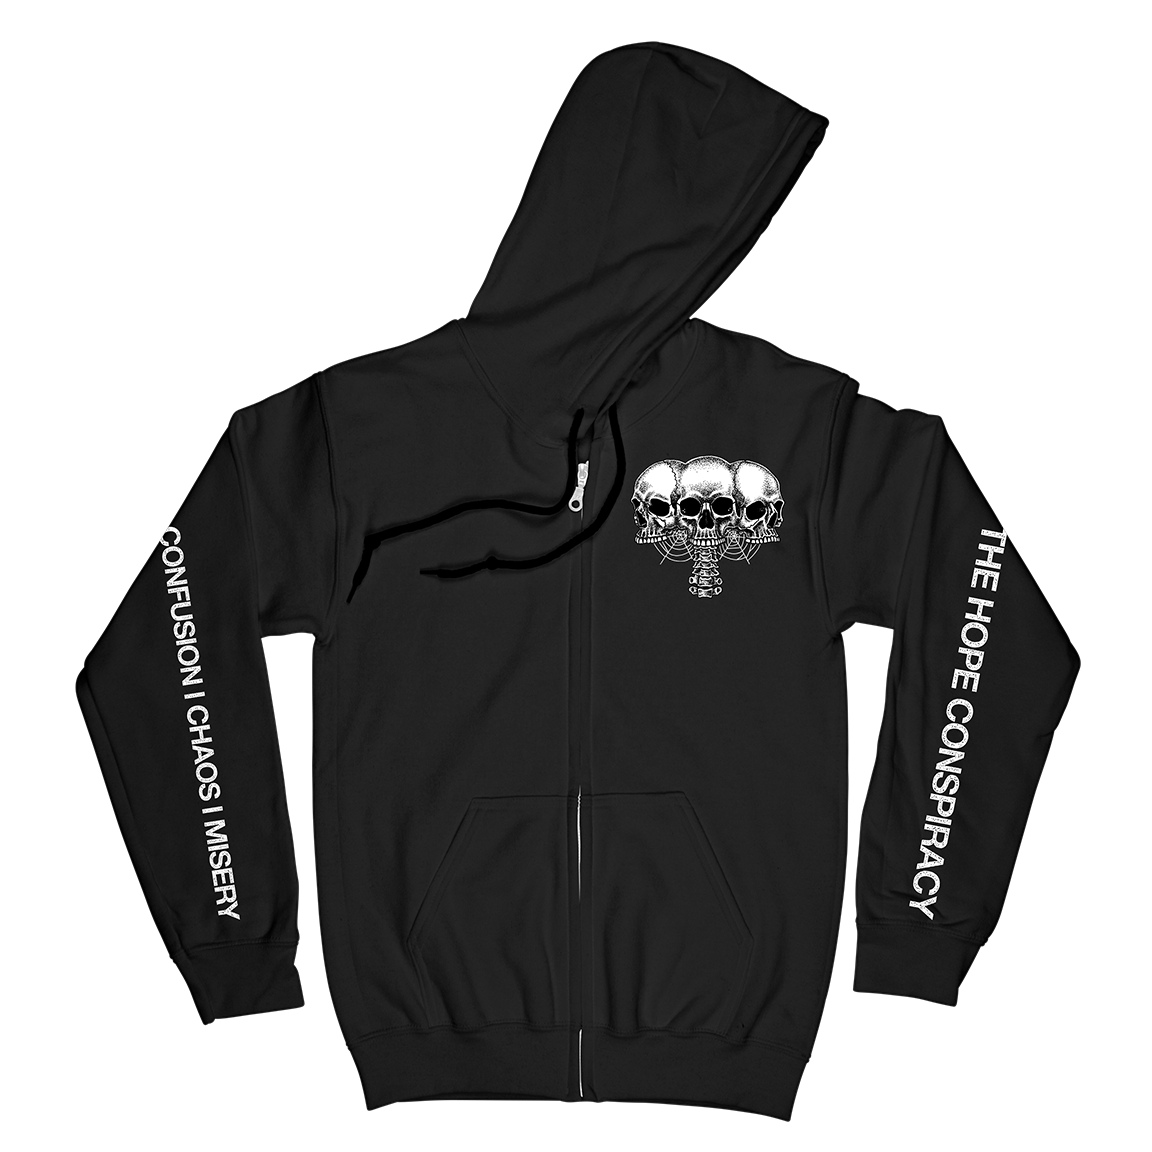 The Hope Conspiracy "CCM: Death Traitors" Black Zip-Up Hoodie